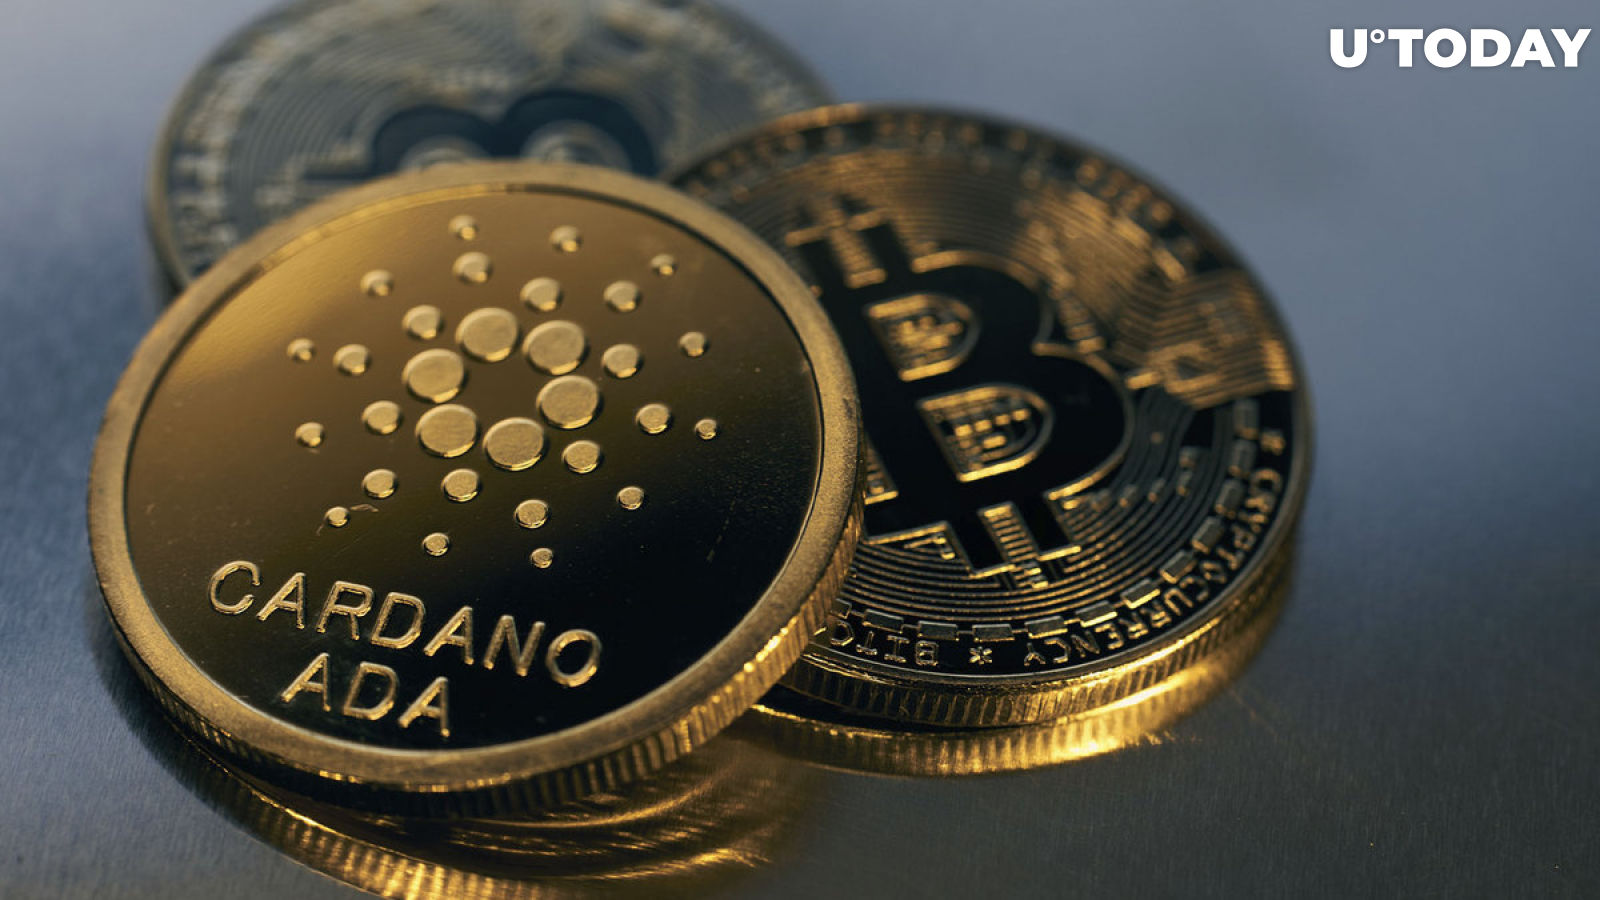 Cardano Achieves Major Milestone With First Wrapped BTC Minted on Network